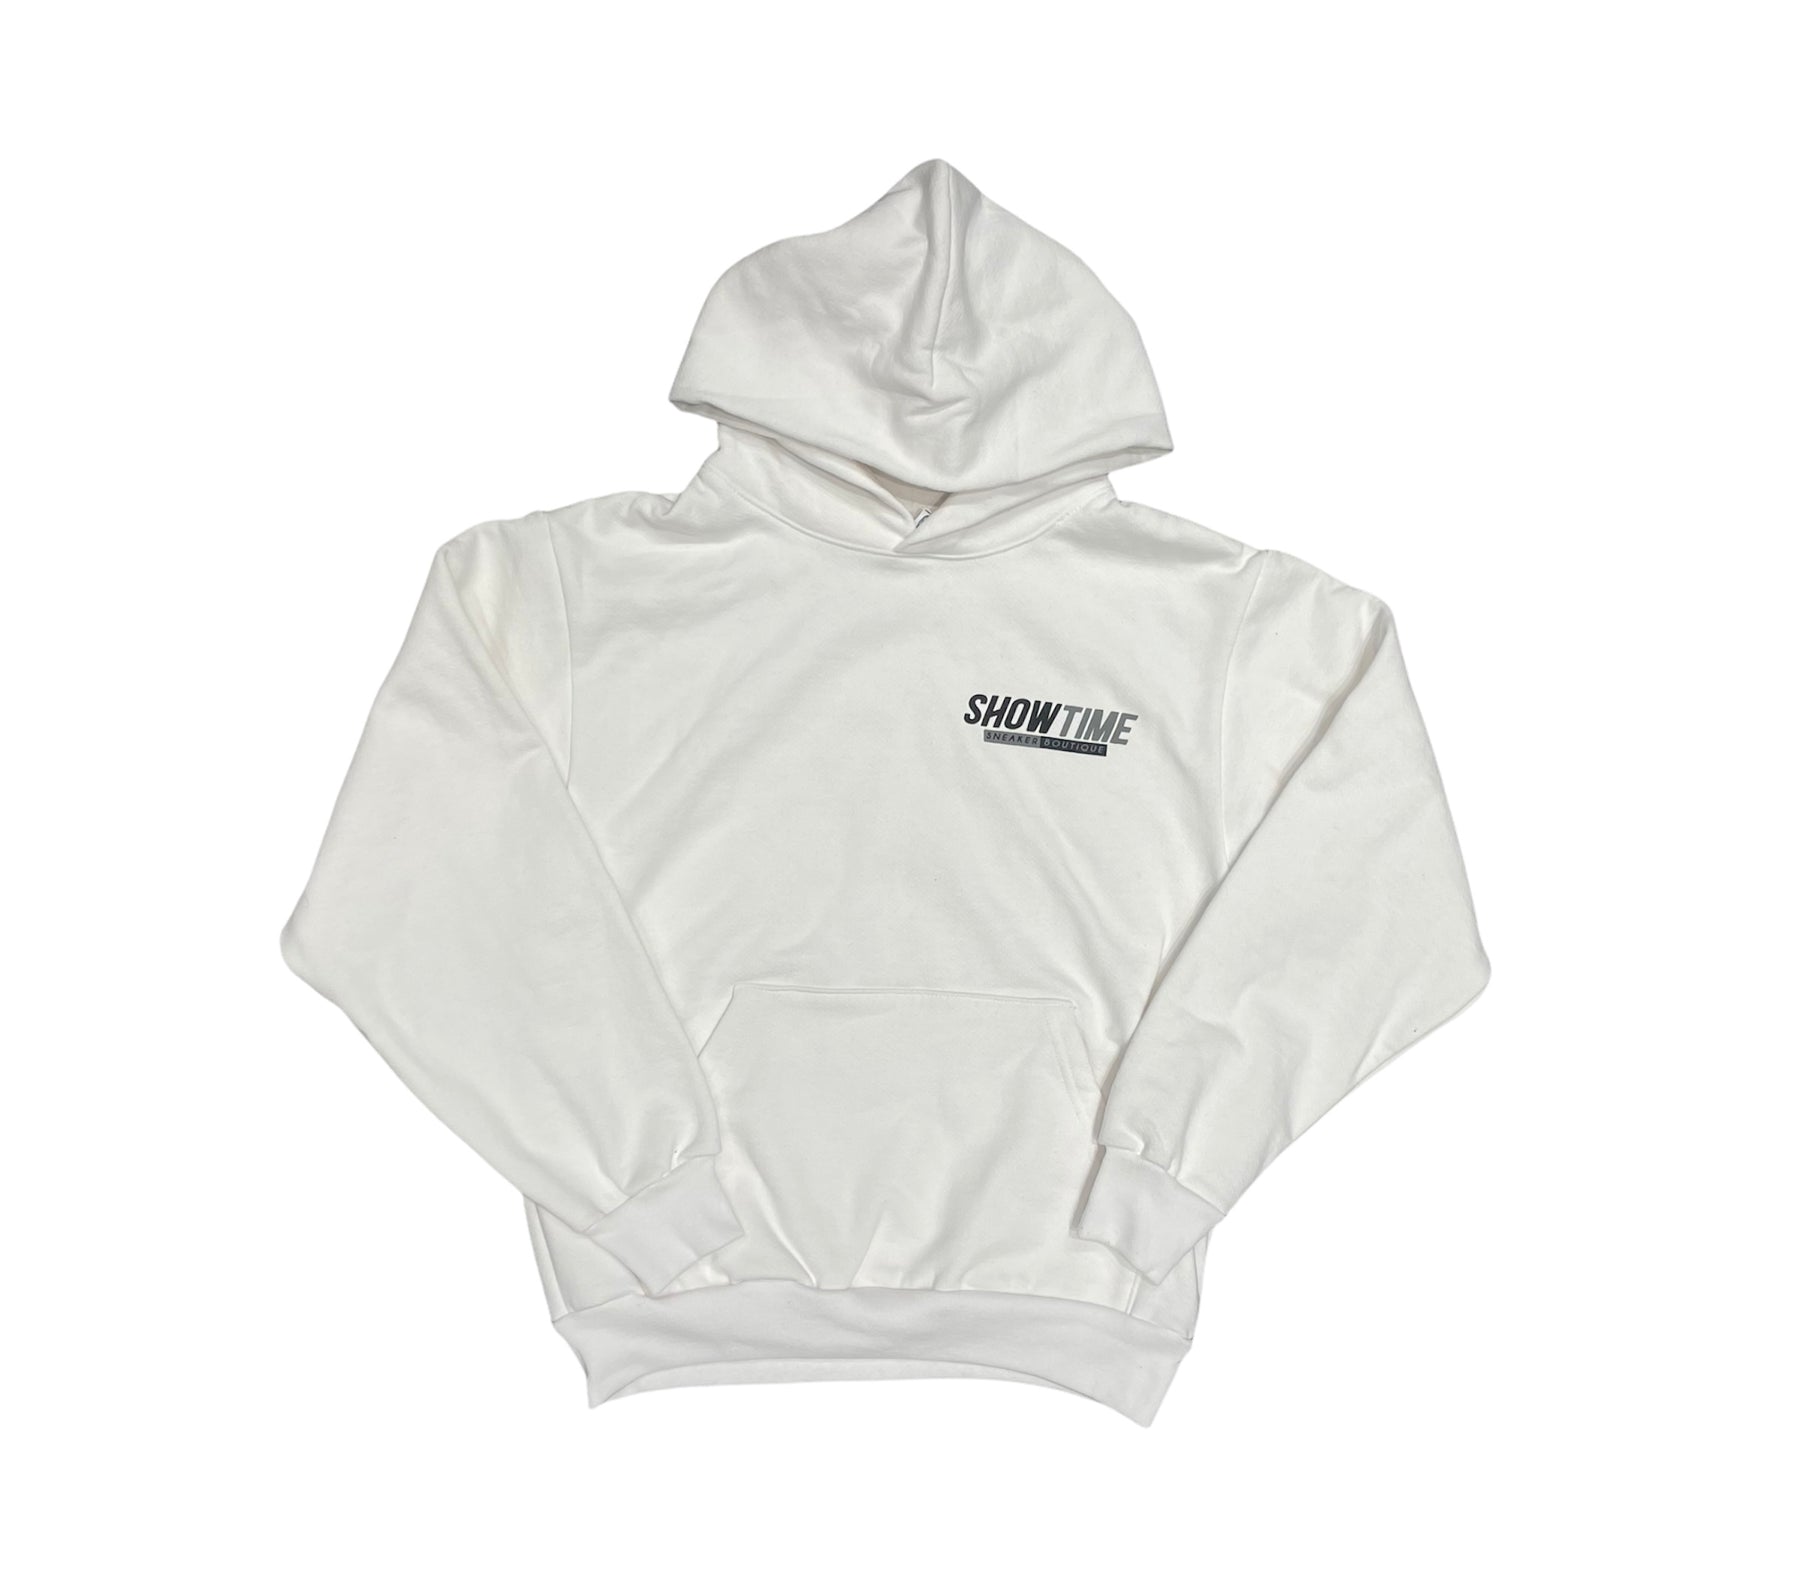 Showtime Sneaker Boutique Hoodie White